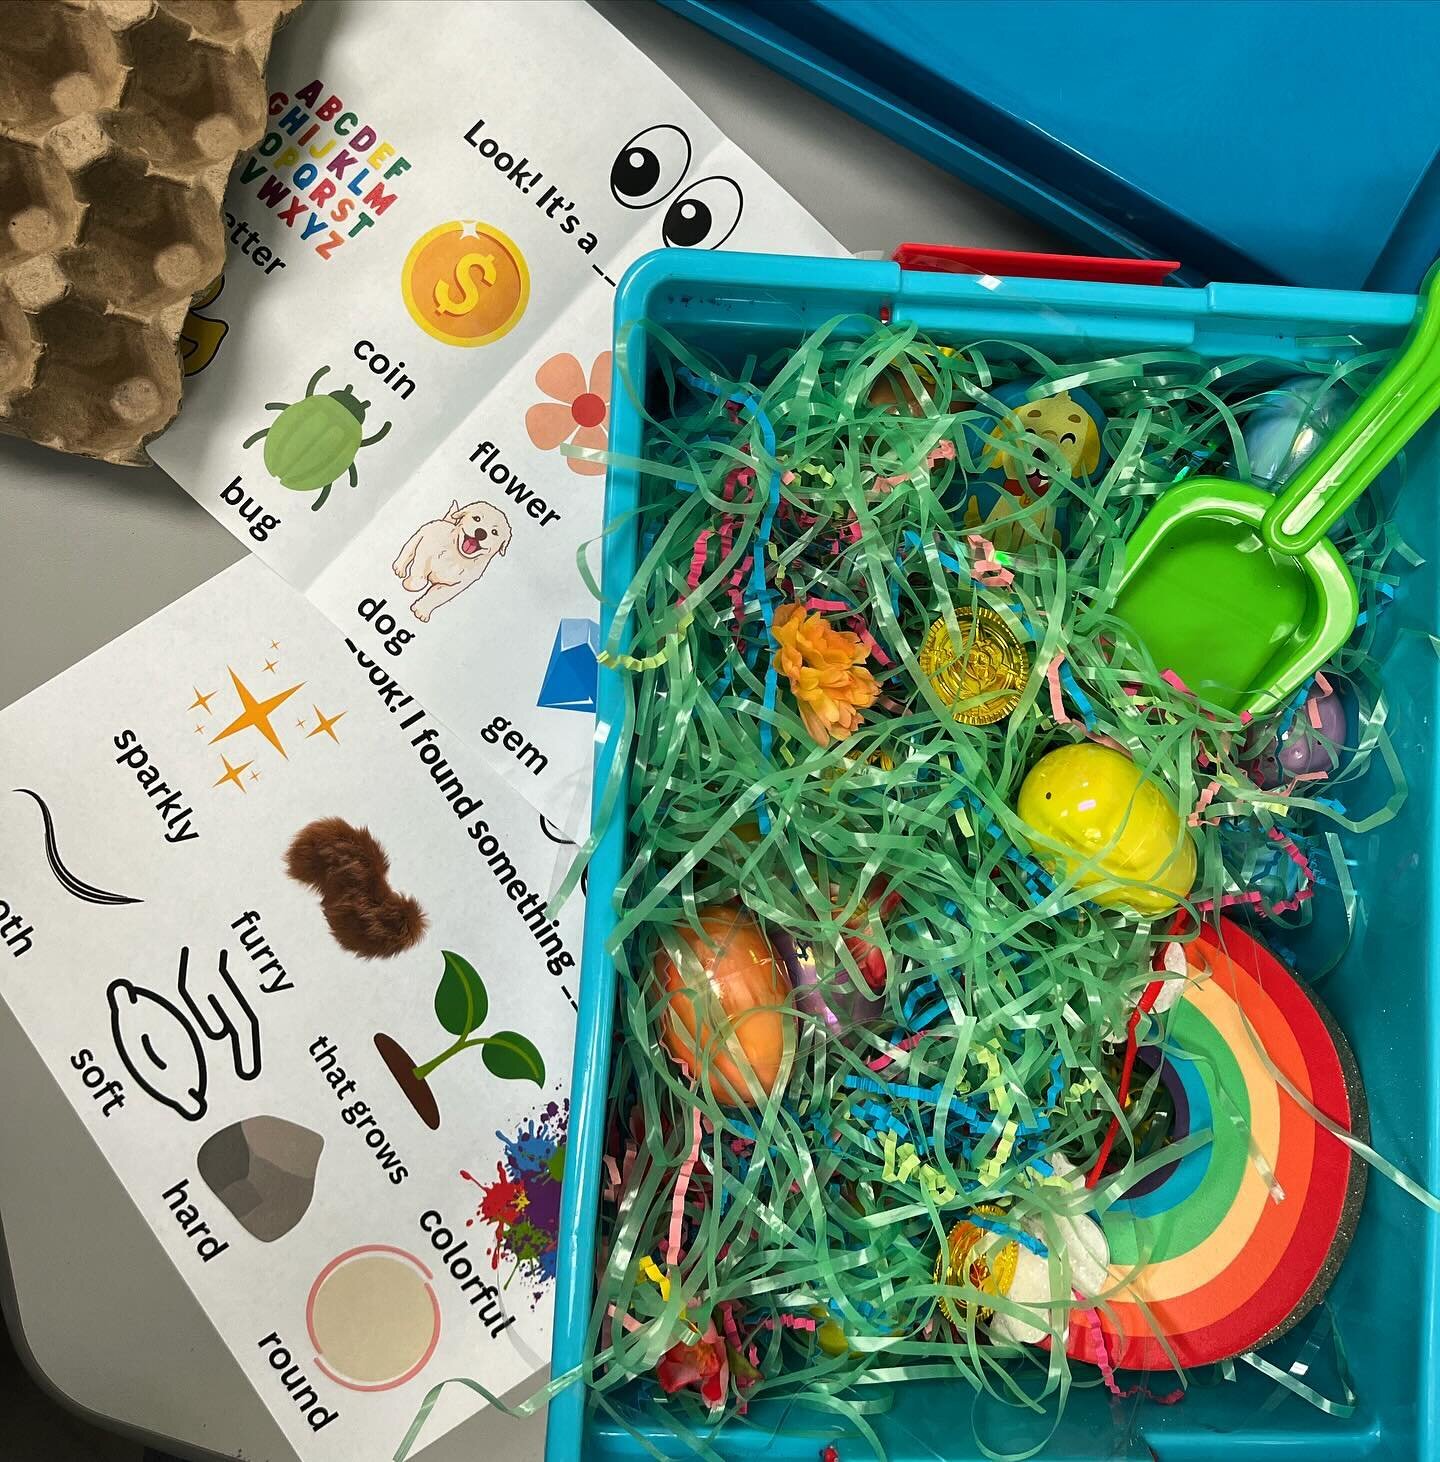 🌸 Spring is here!! Honestly had so much fun putting this sensory bin together. Since I work with kids of different ages and with different types of goals, I aim to keep these activities as versatile as possible. There are articulation words in the e